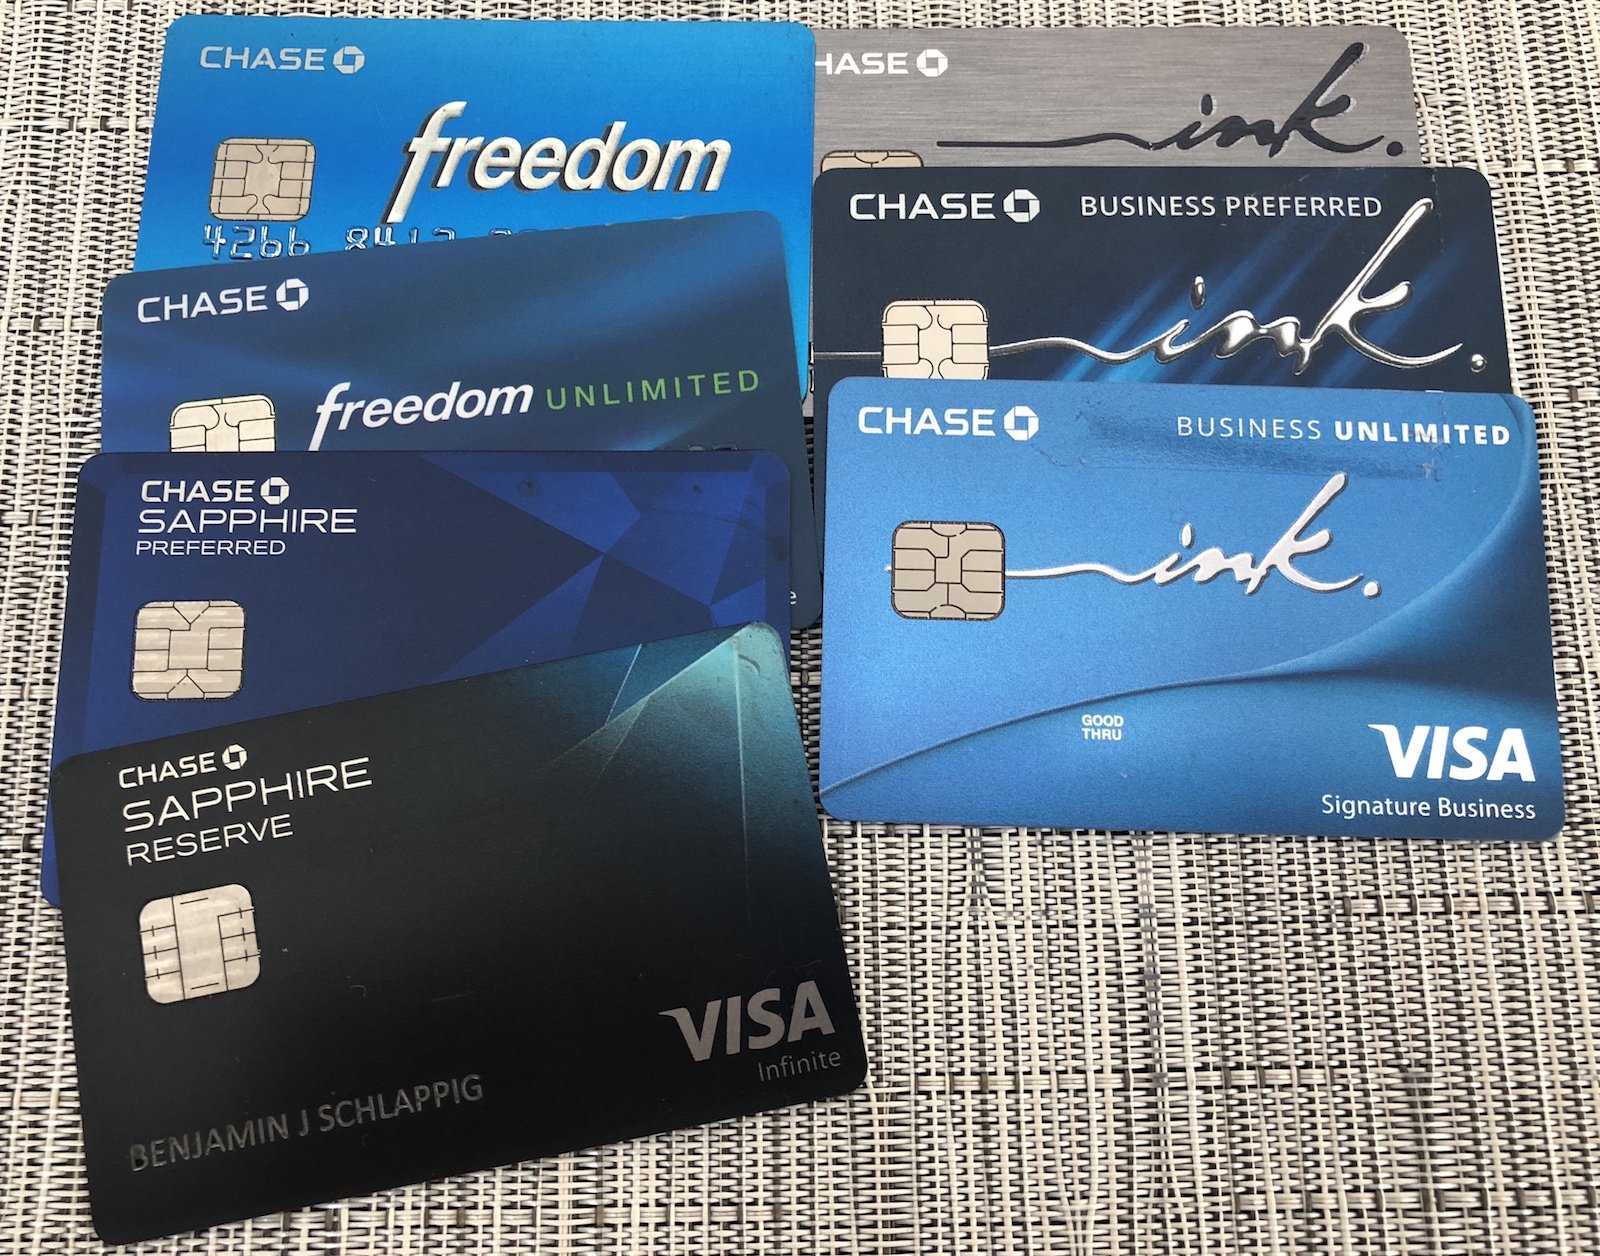 chase credit card add travel